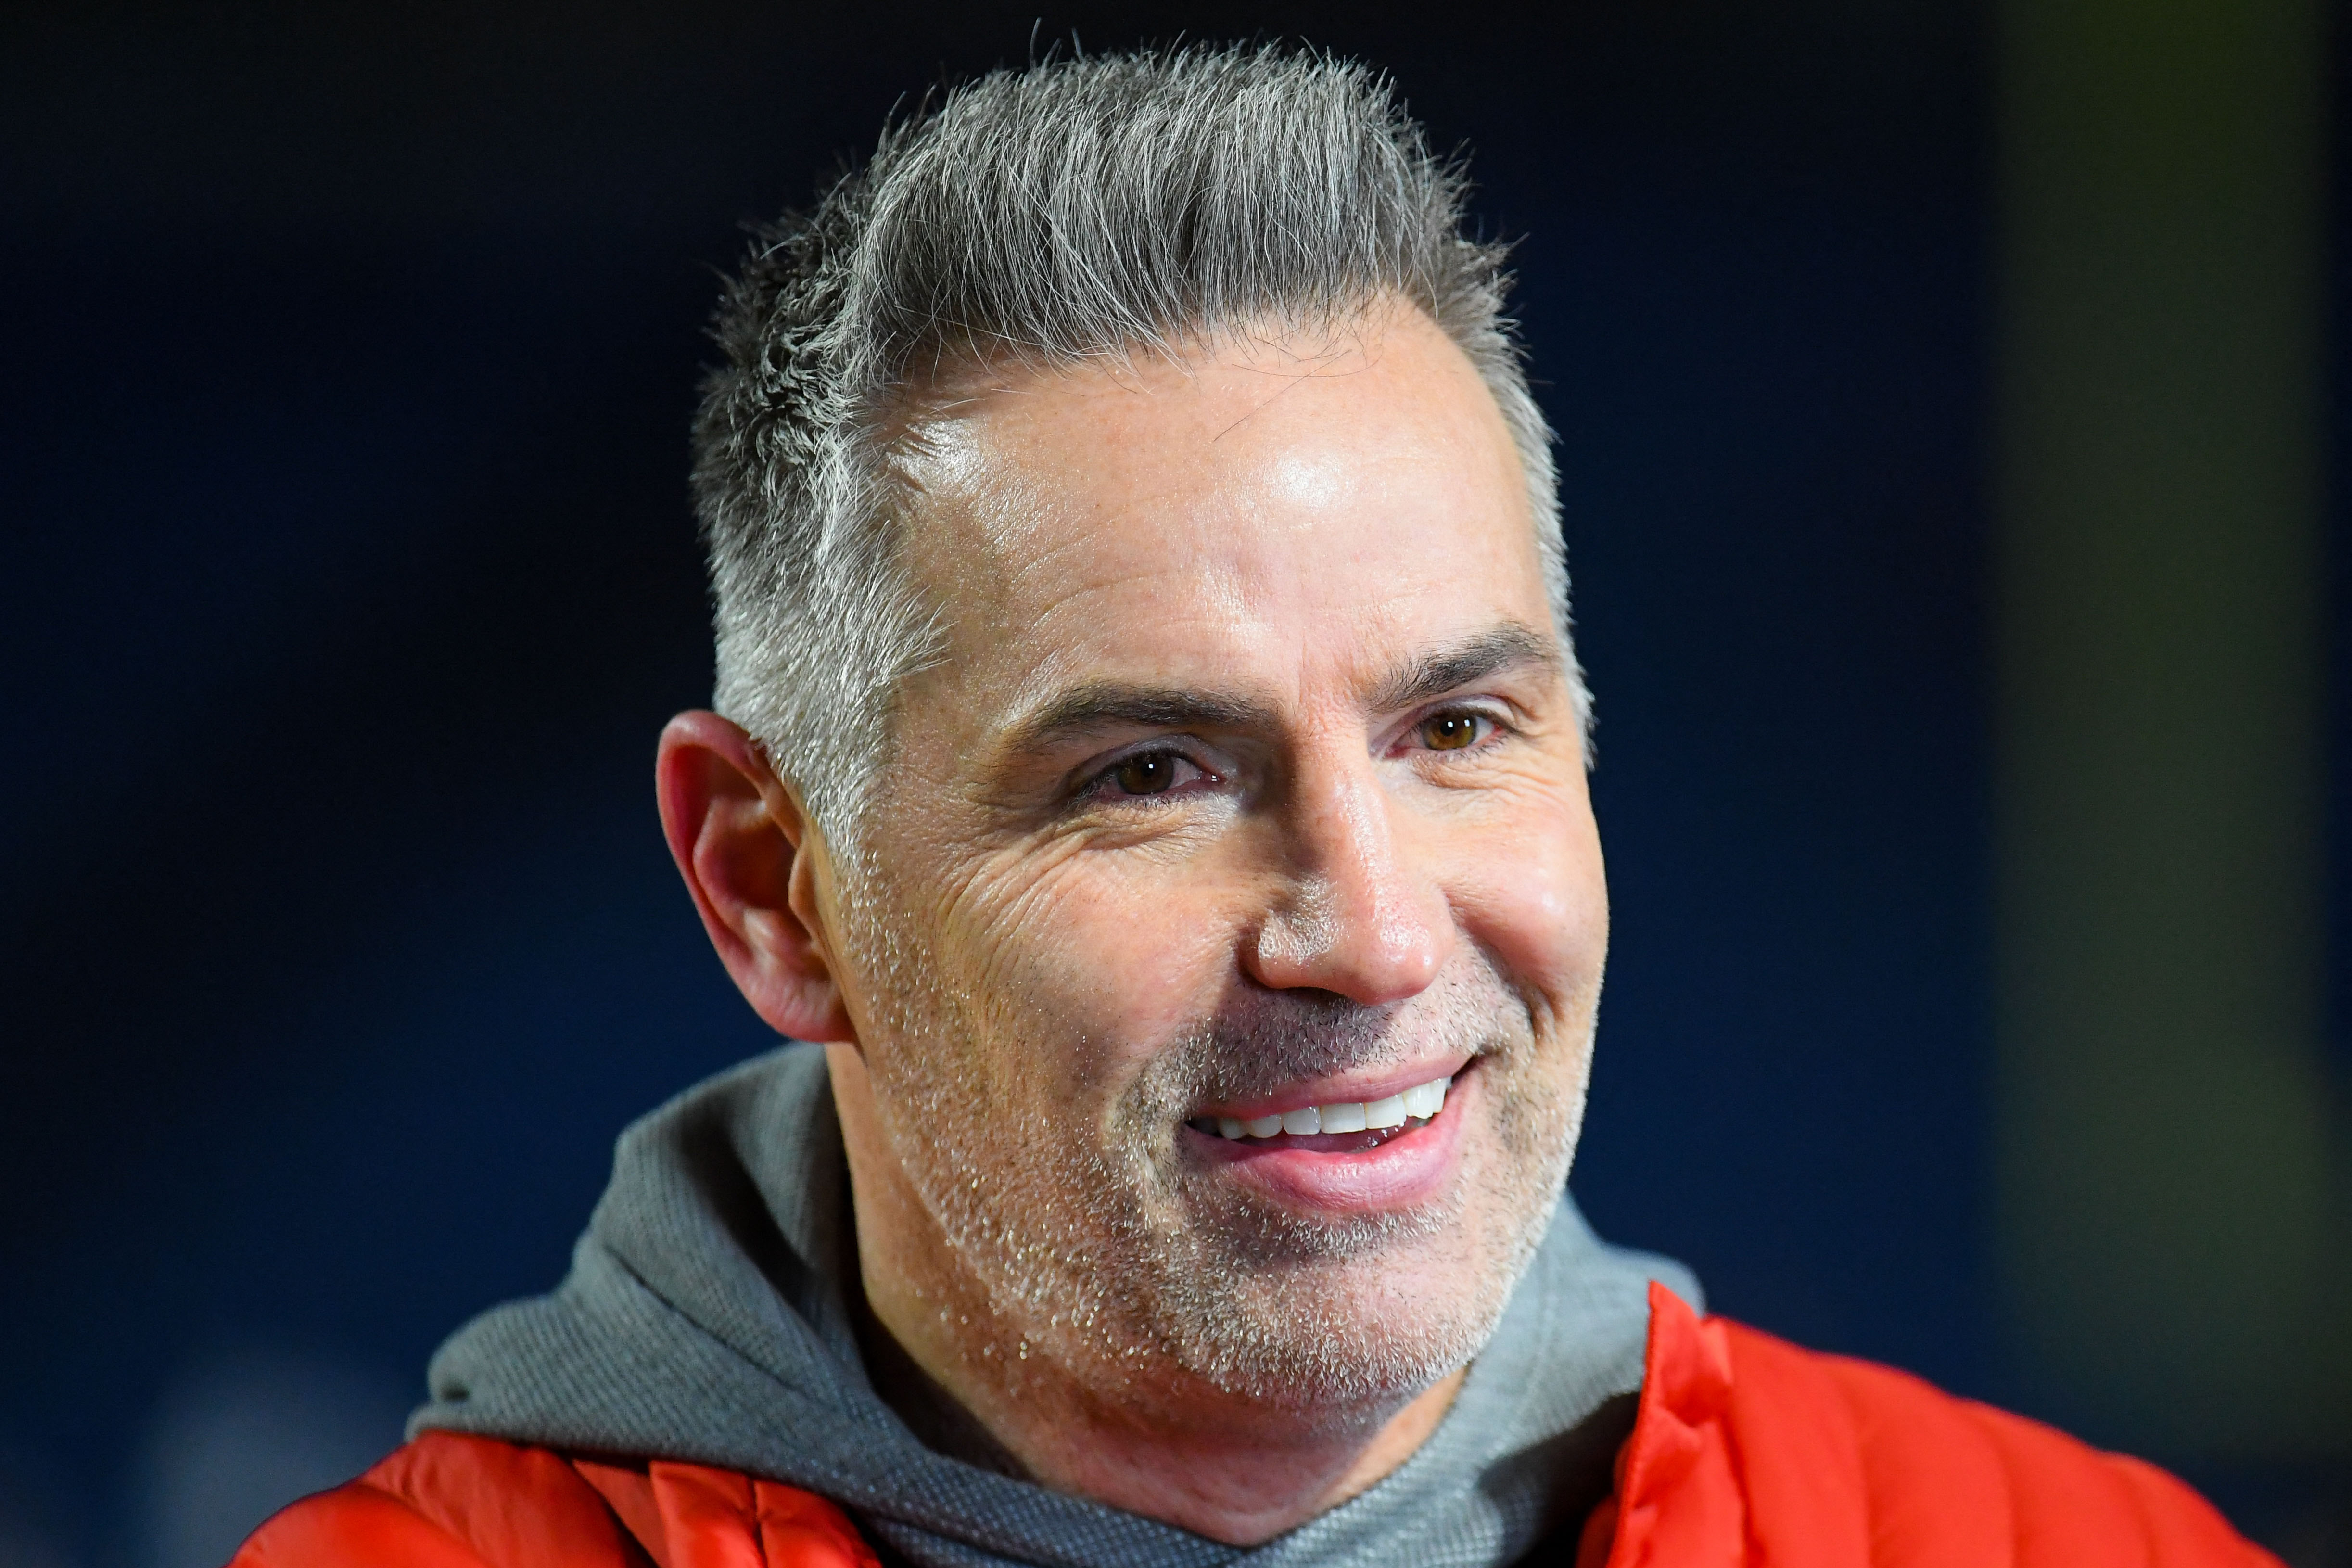 Kurt Warner sees underdog story, but always 'expected to be successful'